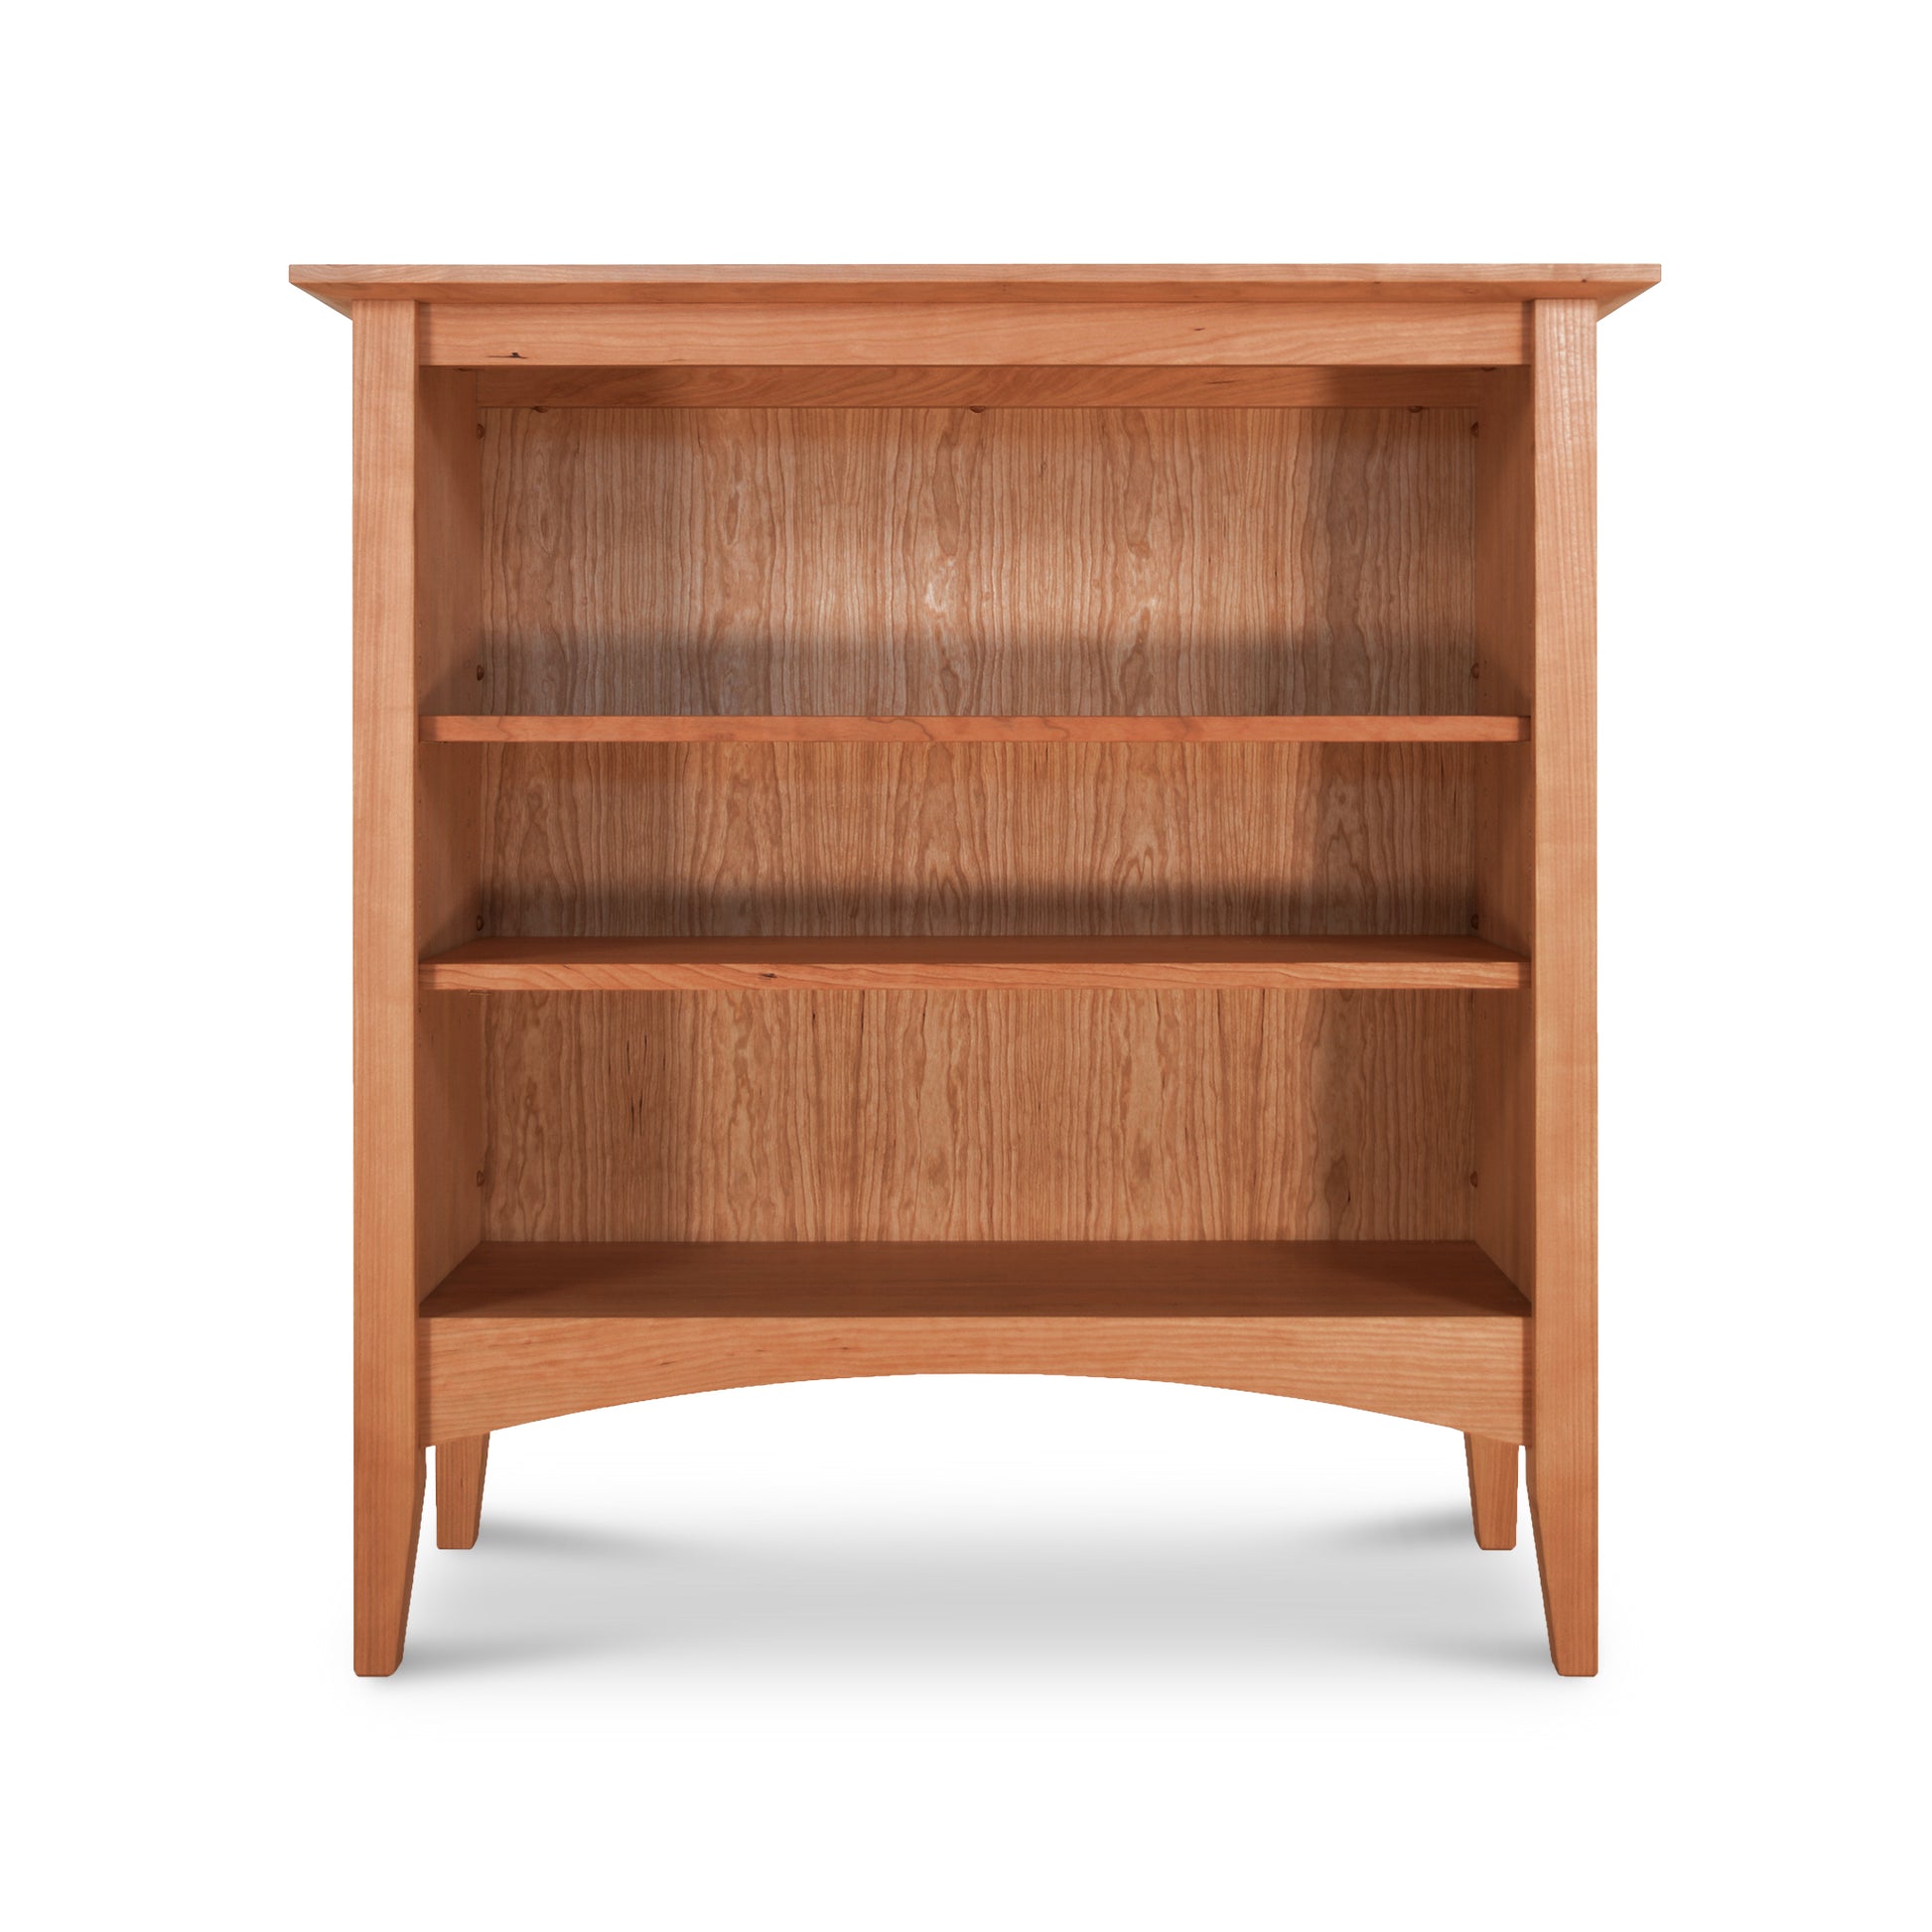 A sustainably harvested American Shaker Bookcase with three shelves, isolated on a white background, by Maple Corner Woodworks.